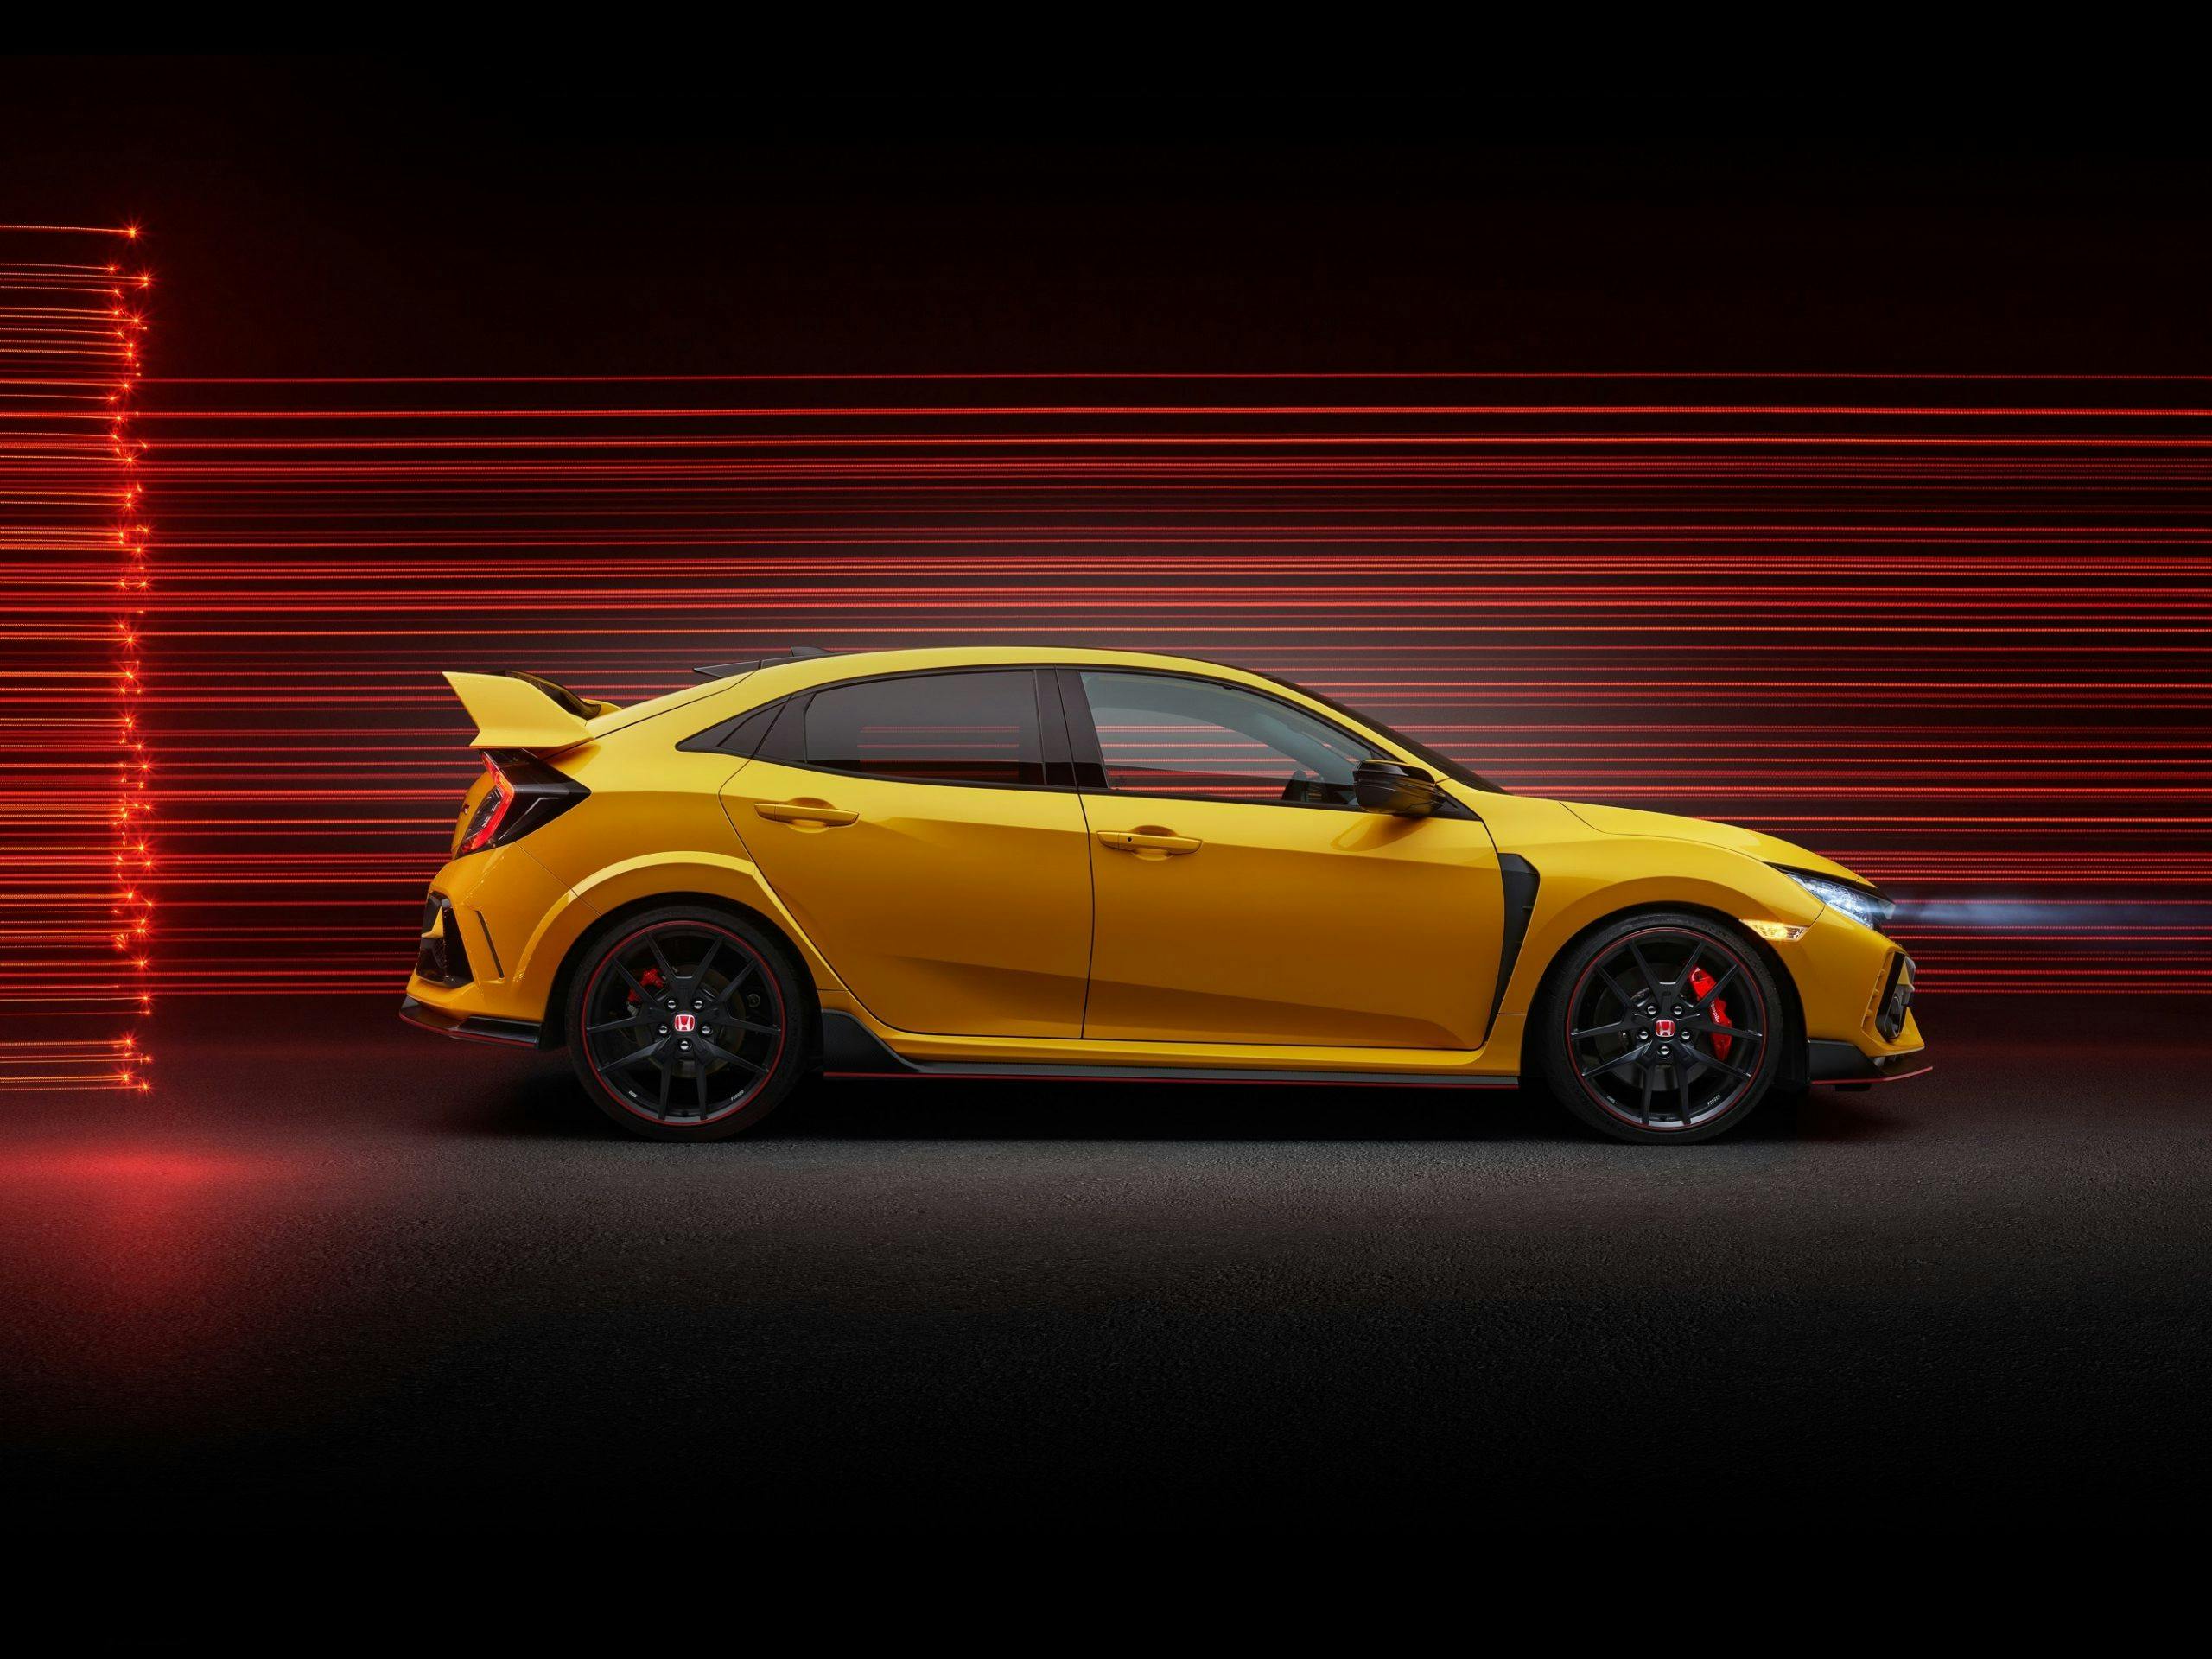 Civic Type R Limited Edition Side Profile